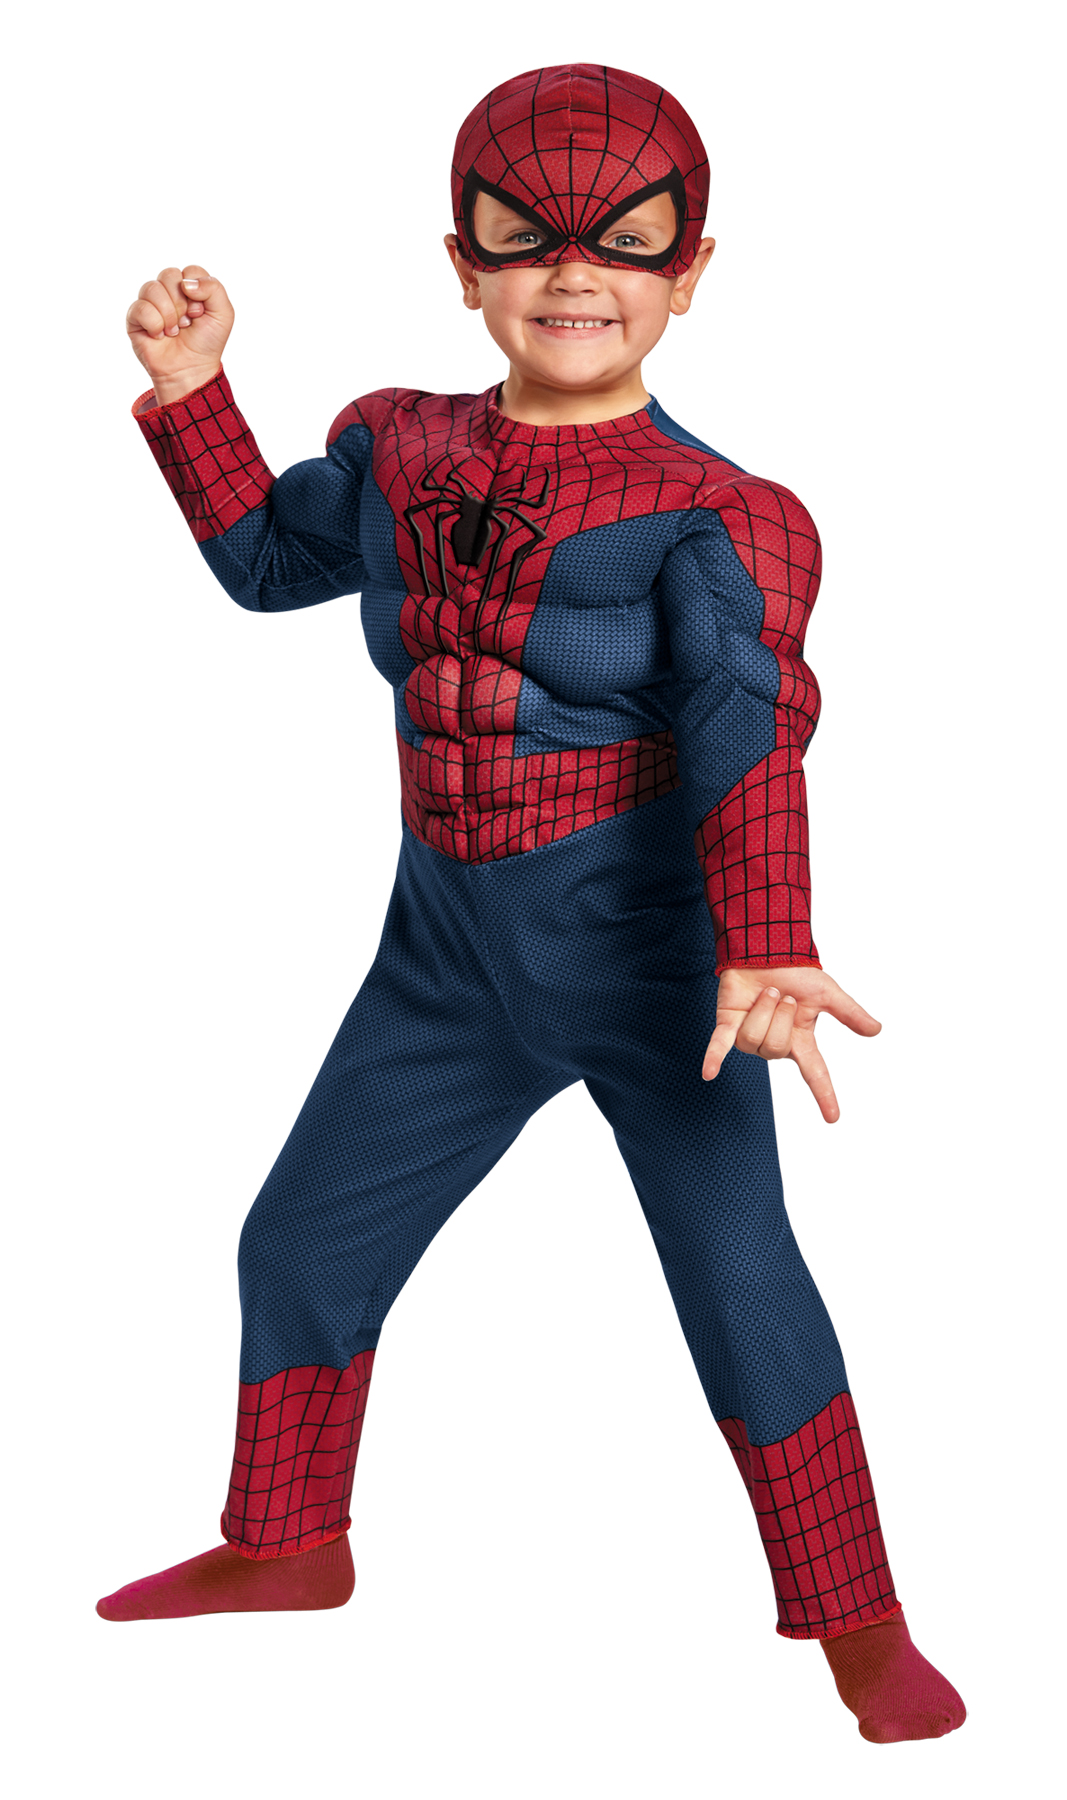 Morris Costumes Spiderman 2 Toddler Muscle - image 1 of 2